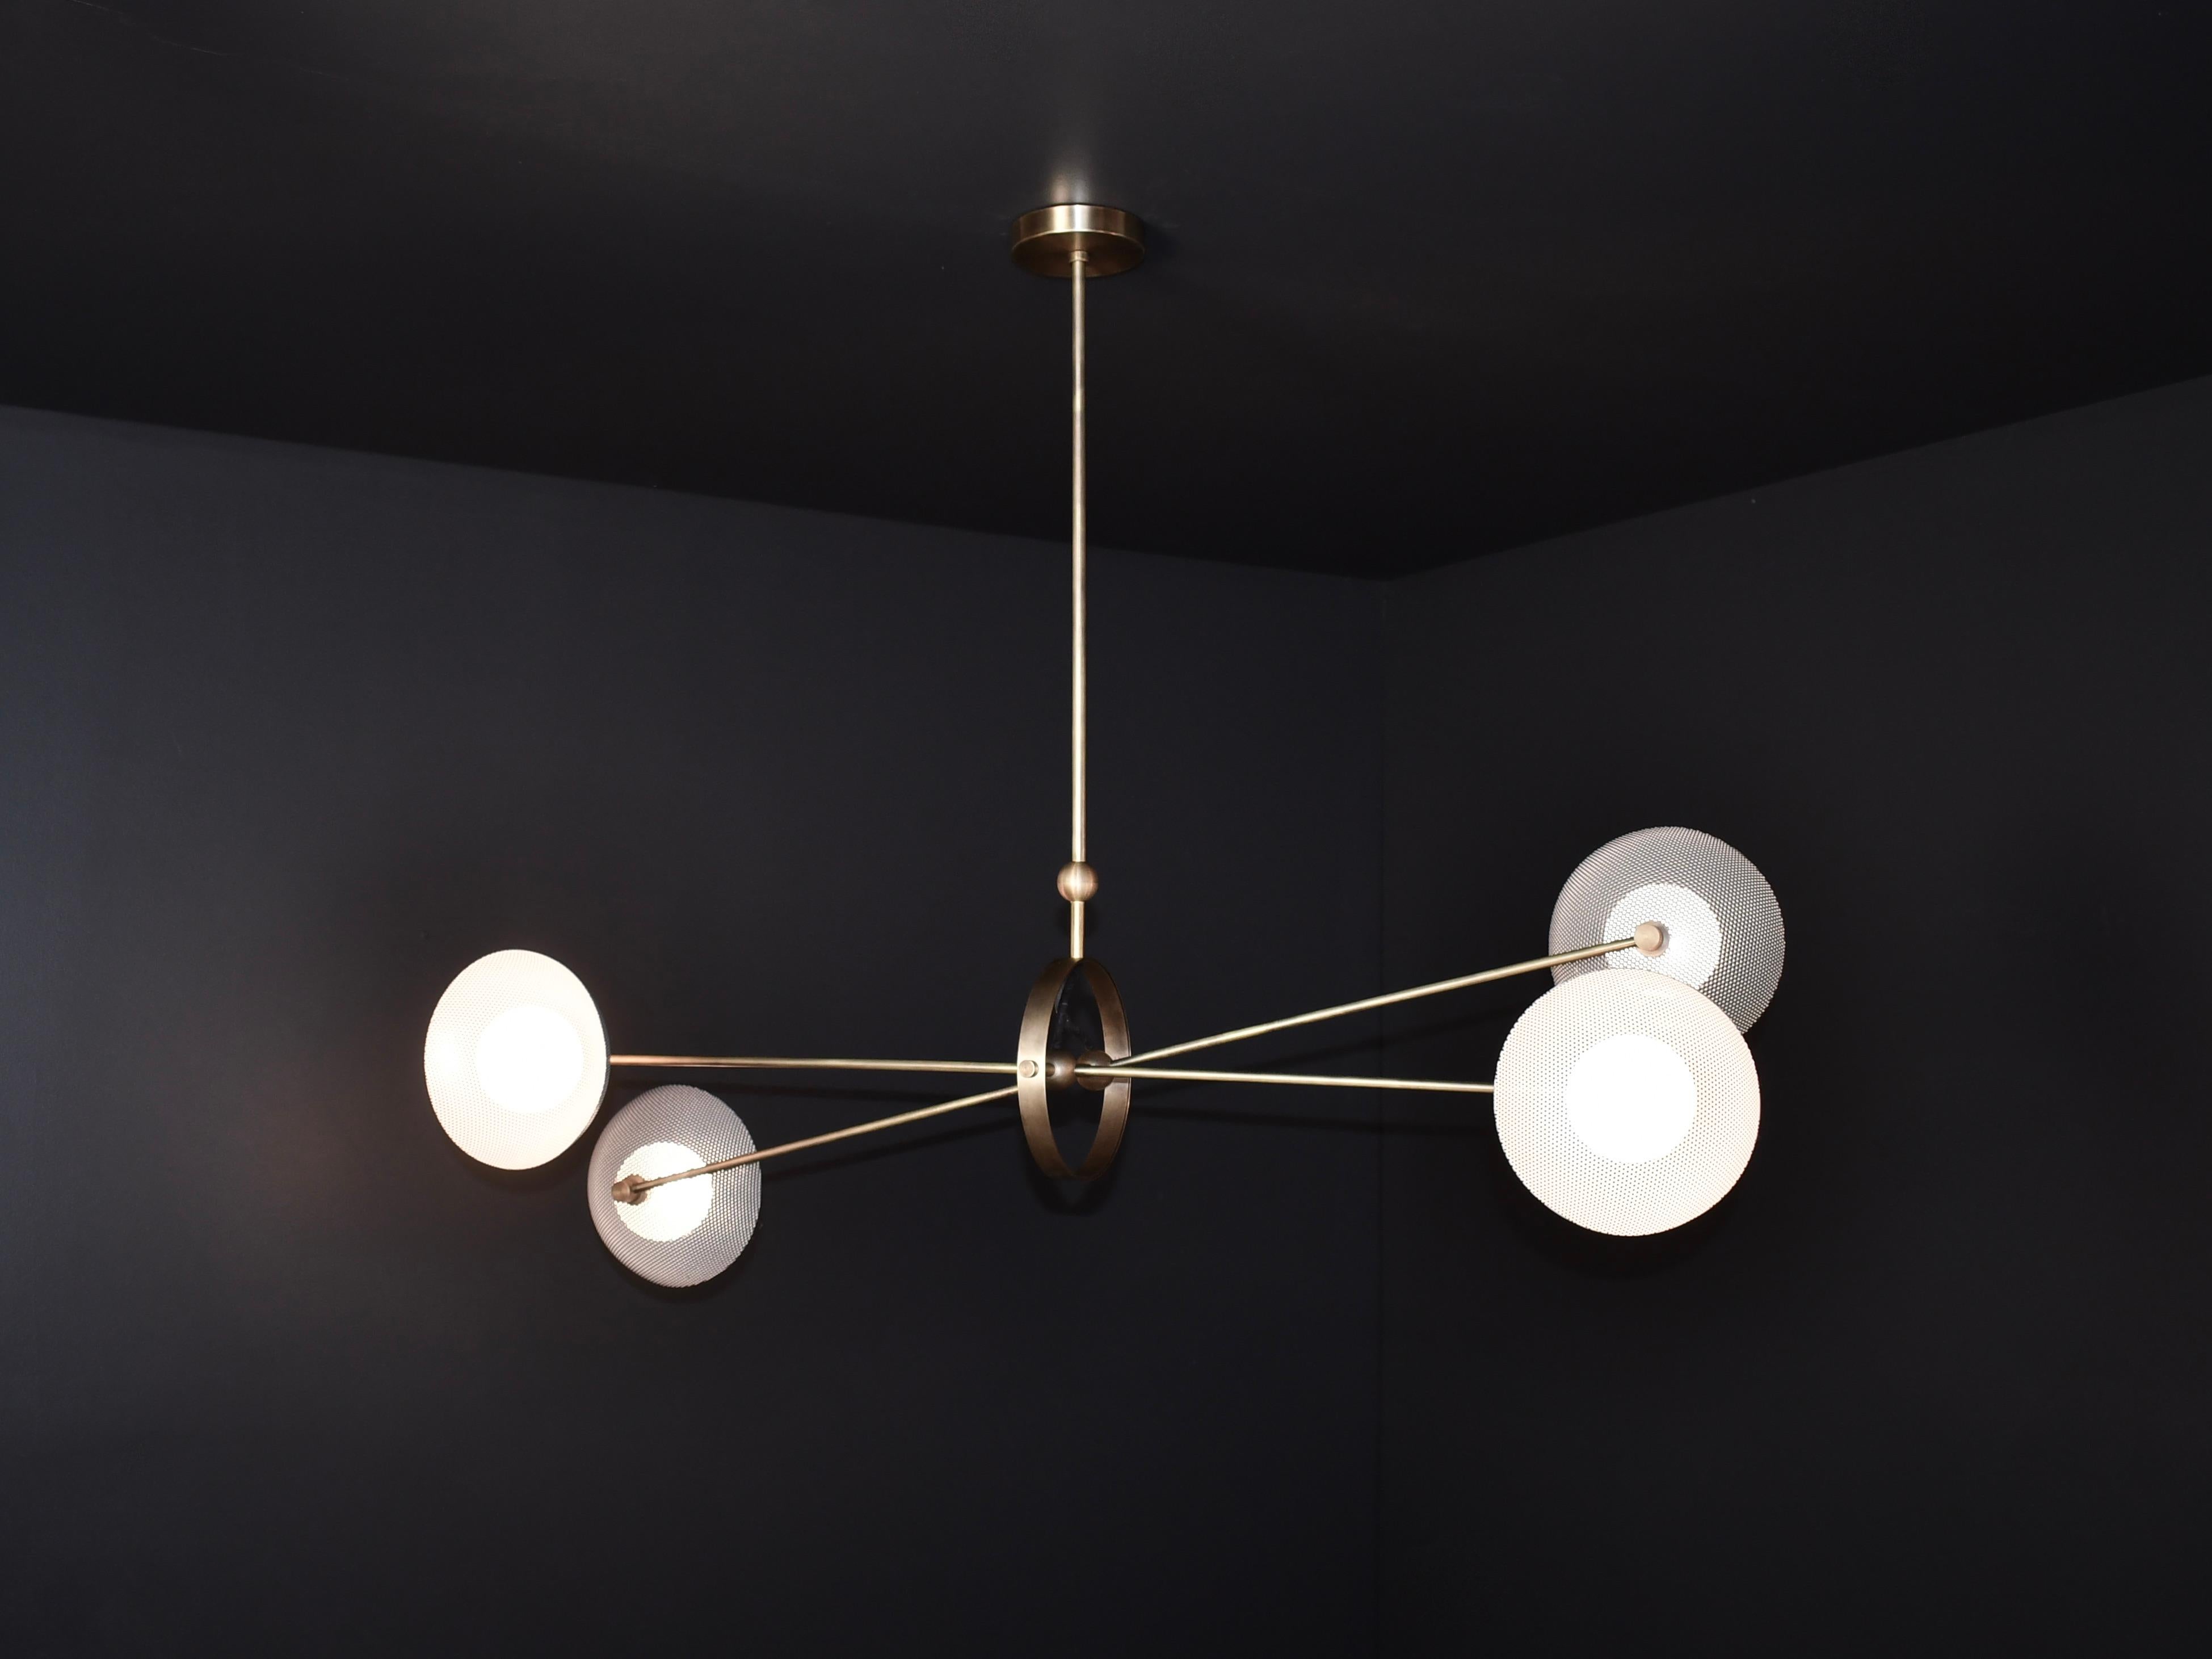 American Parallax Ceiling Fixture in Brass and Gray Enamel by Blueprint Lighting, 2020